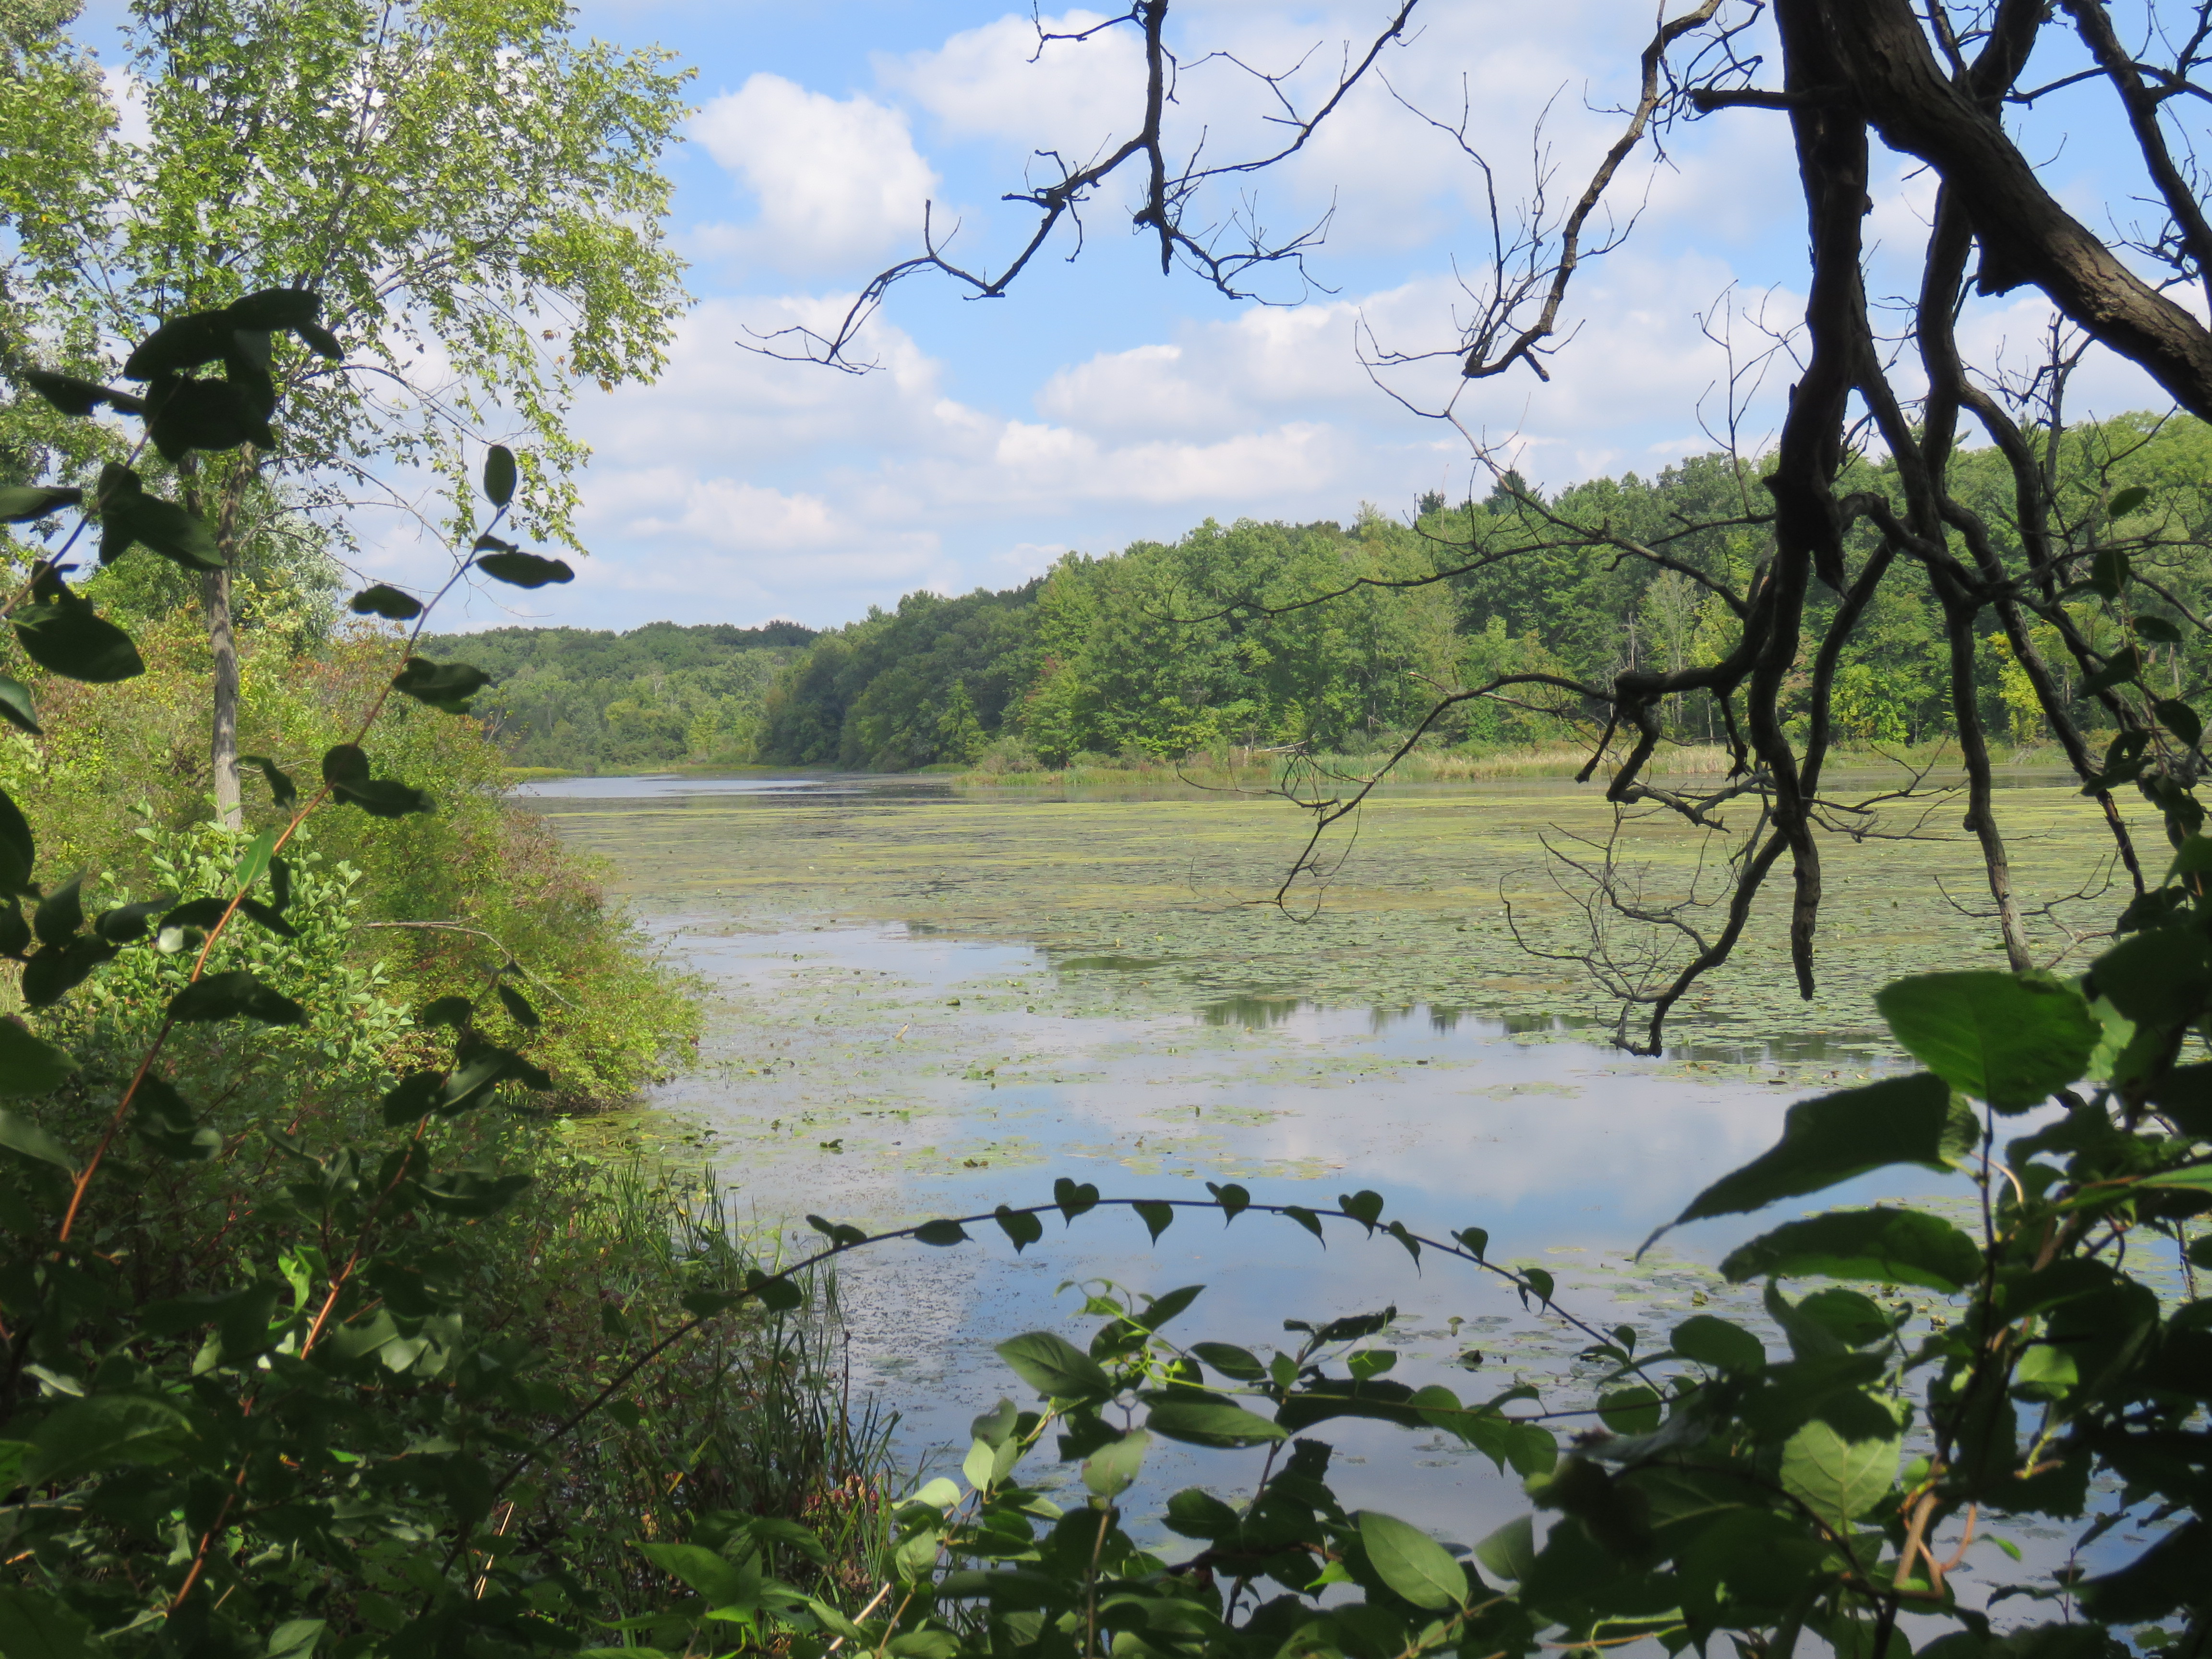 A view of Stony Creek Lake as seen through the foliage. The water is covered with lily pads and the trees across the lake are in the distance. 